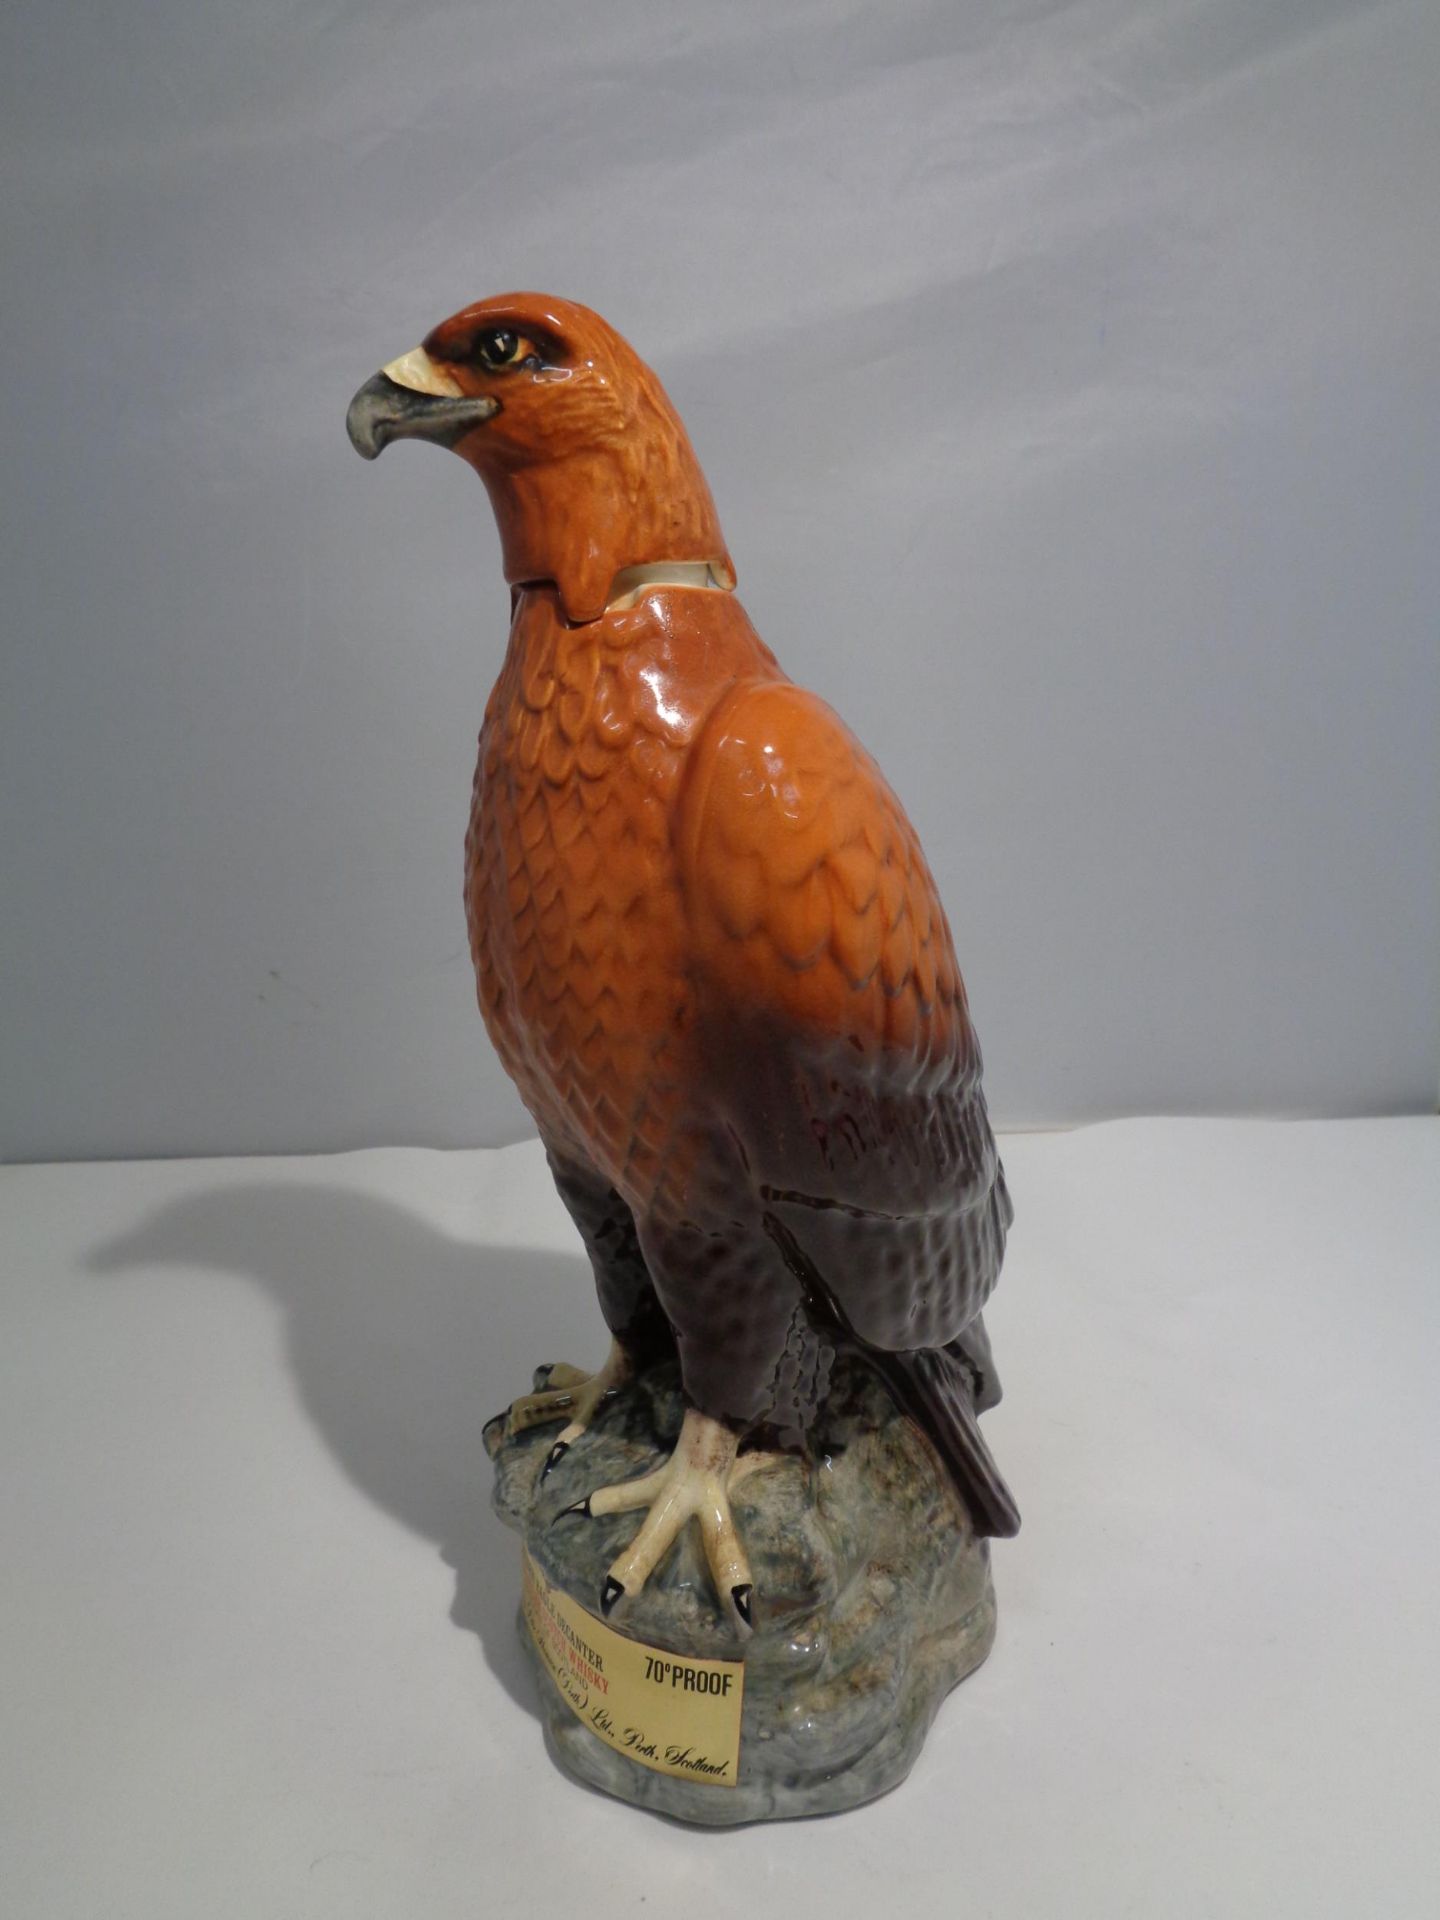 A CERAMIC BENEAGLES SCOTCH WHISKEY DECANTER IN THE DESIGN OF A GOLDEN EAGLE A/F - Image 2 of 6